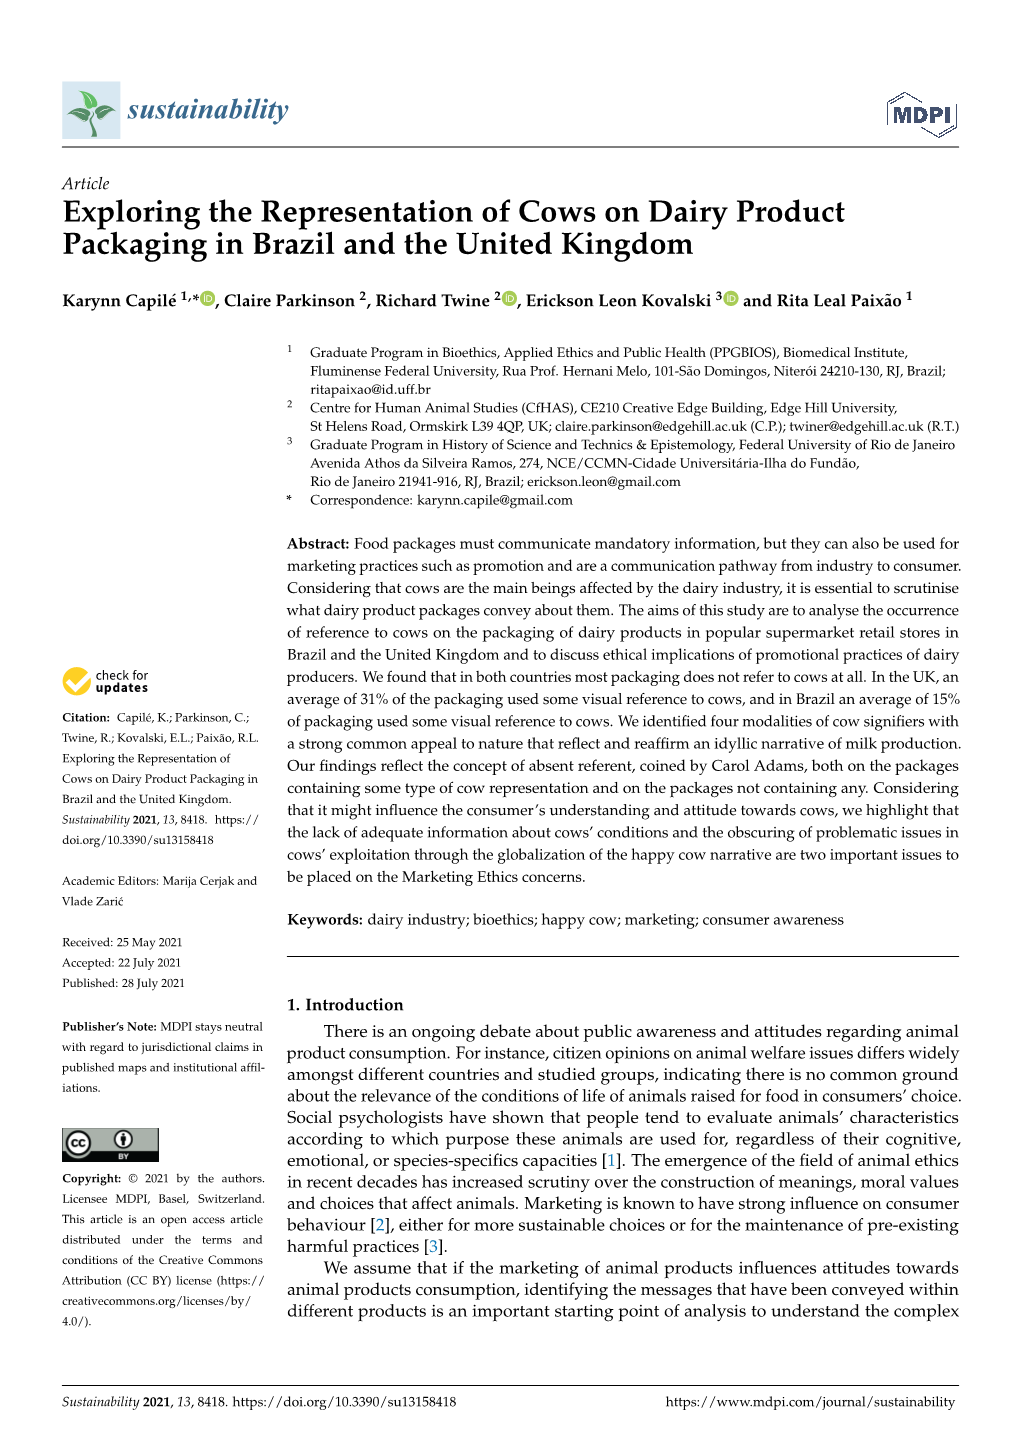 Exploring the Representation of Cows on Dairy Product Packaging in Brazil and the United Kingdom